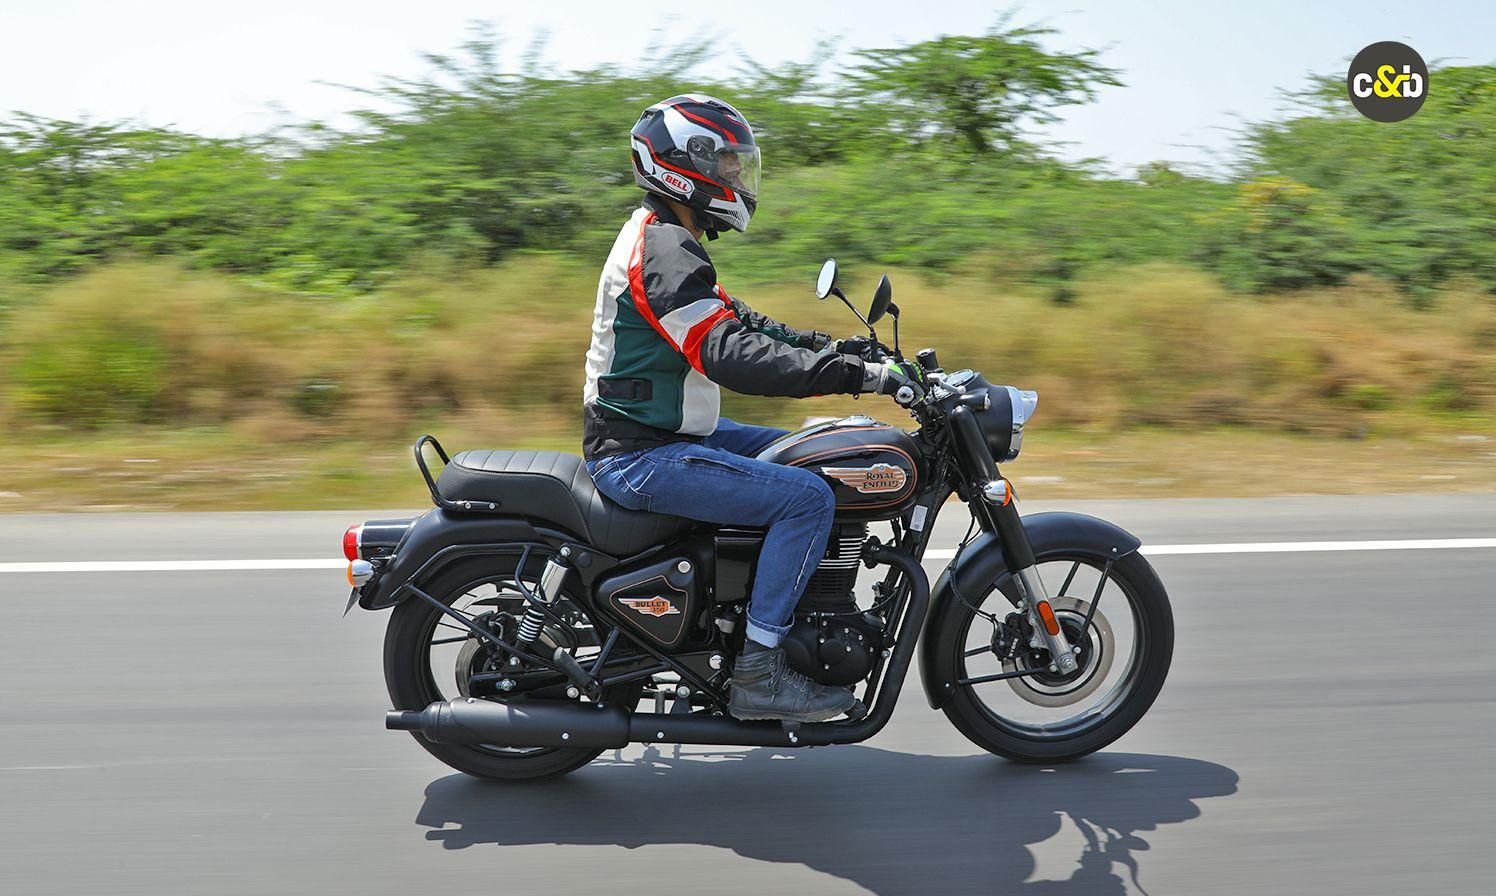 Latest Reviews on Bullet 350 